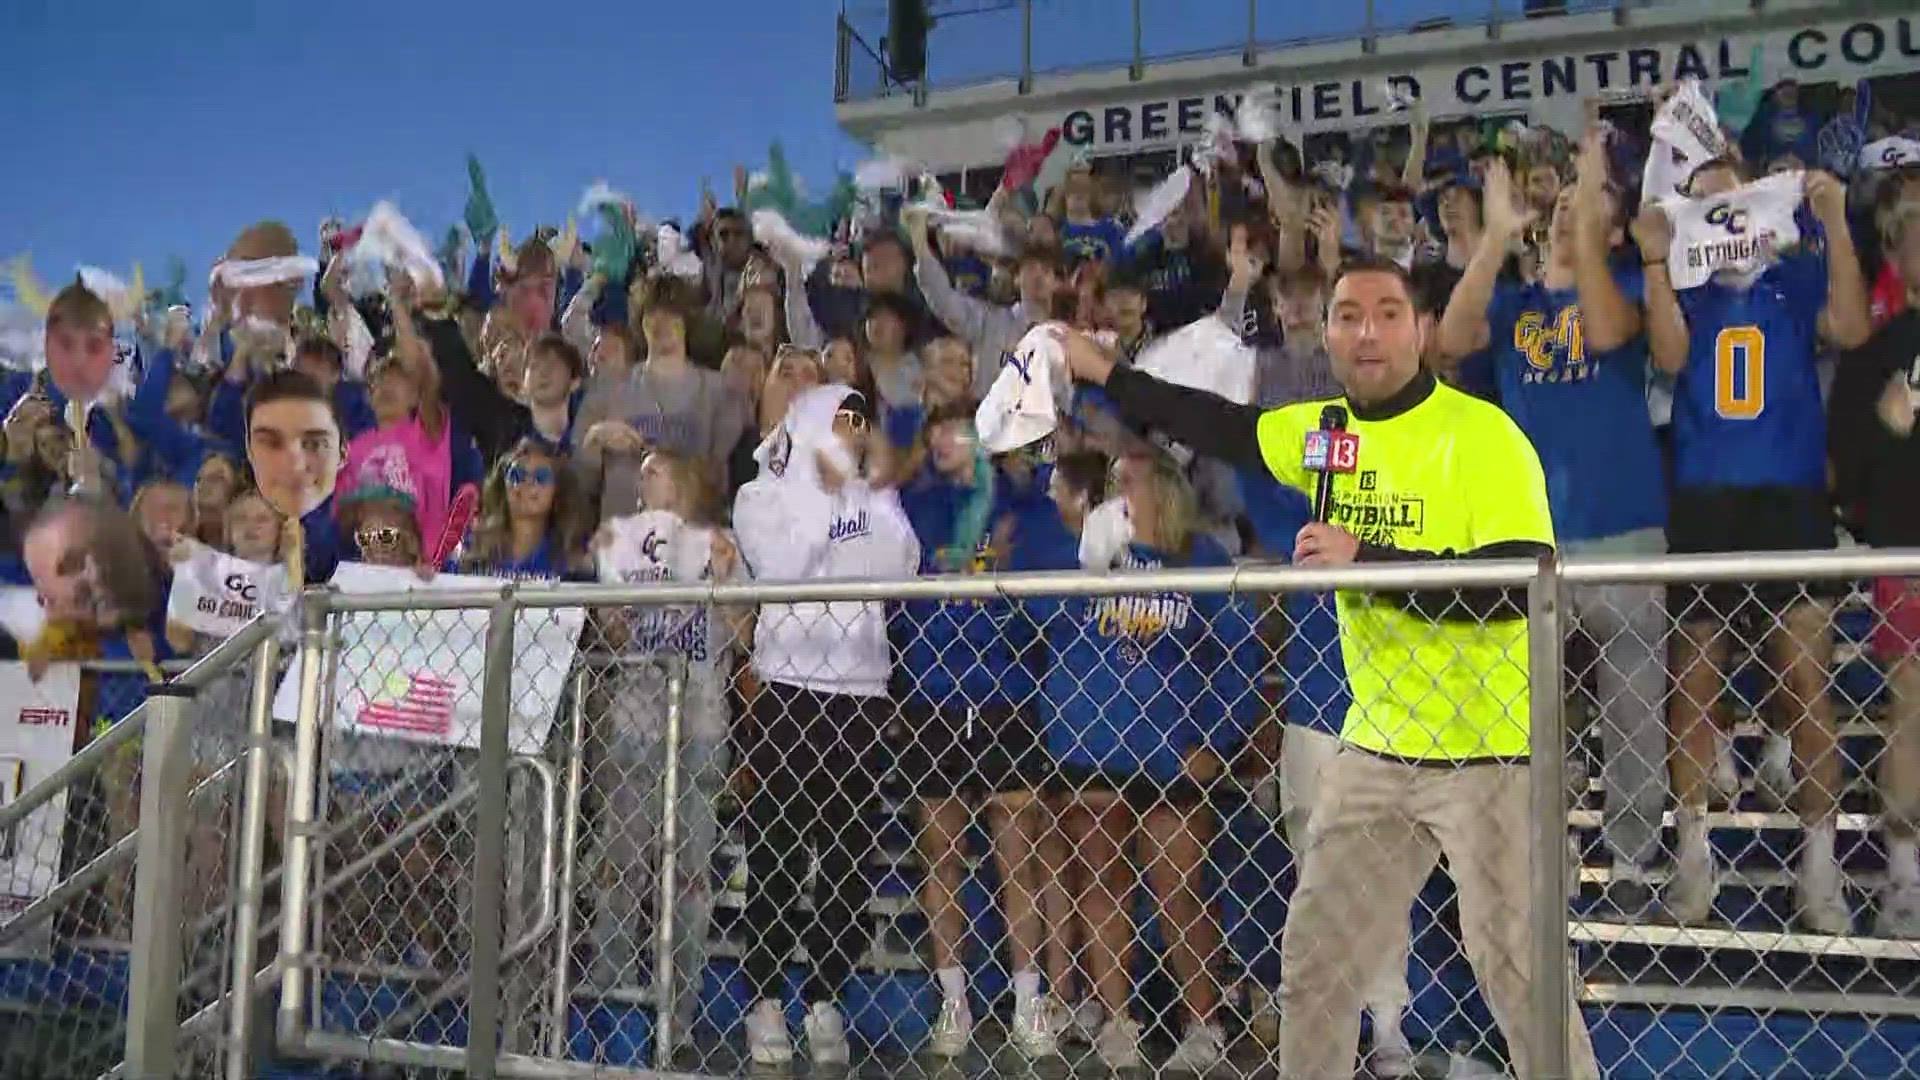 Dominic Miranda reports live from Greenfield-Central High School.